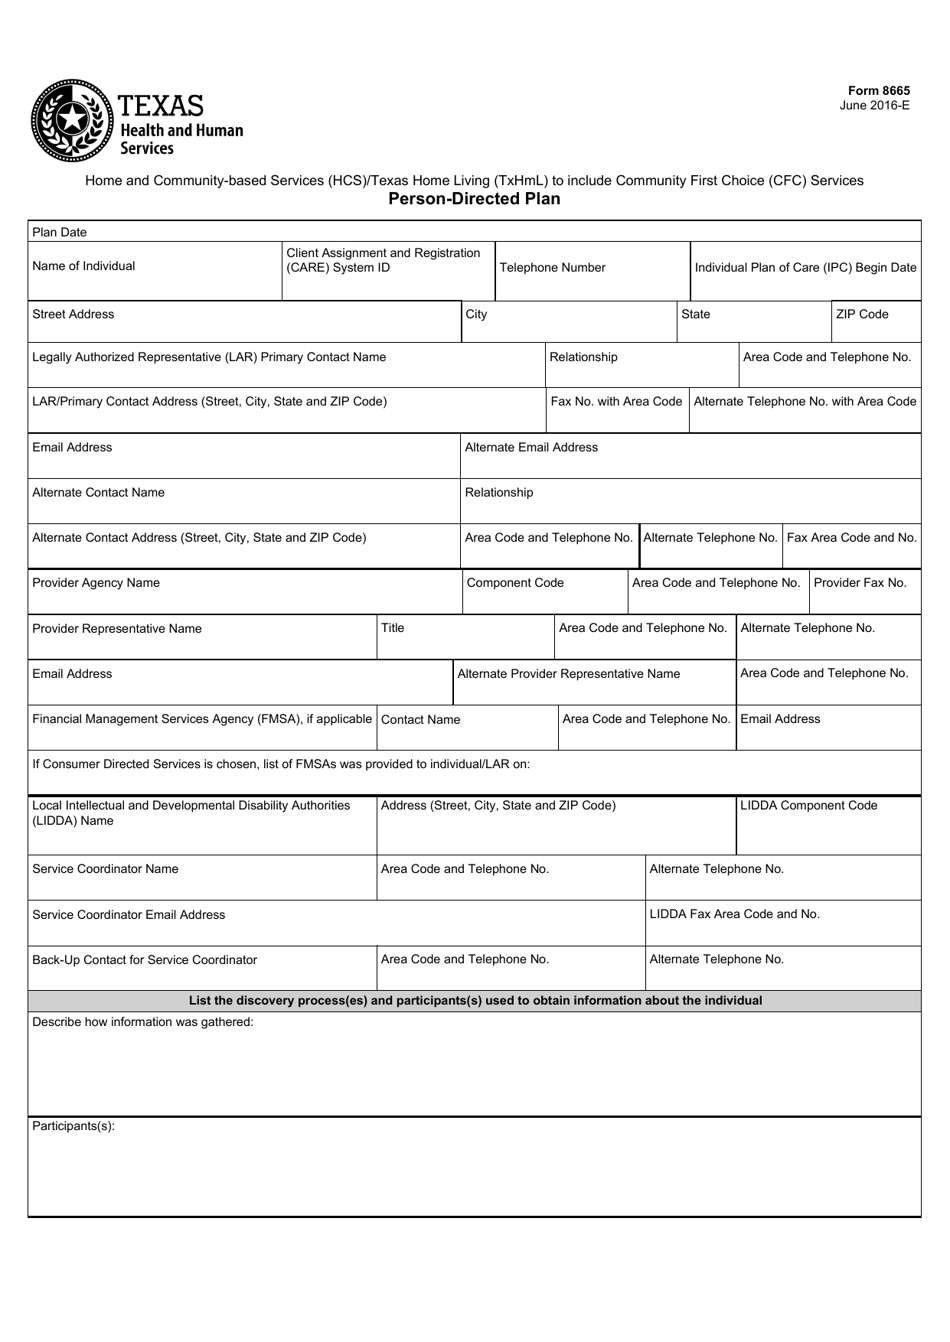 Form 8665 Person-Directed Plan - Texas, Page 1